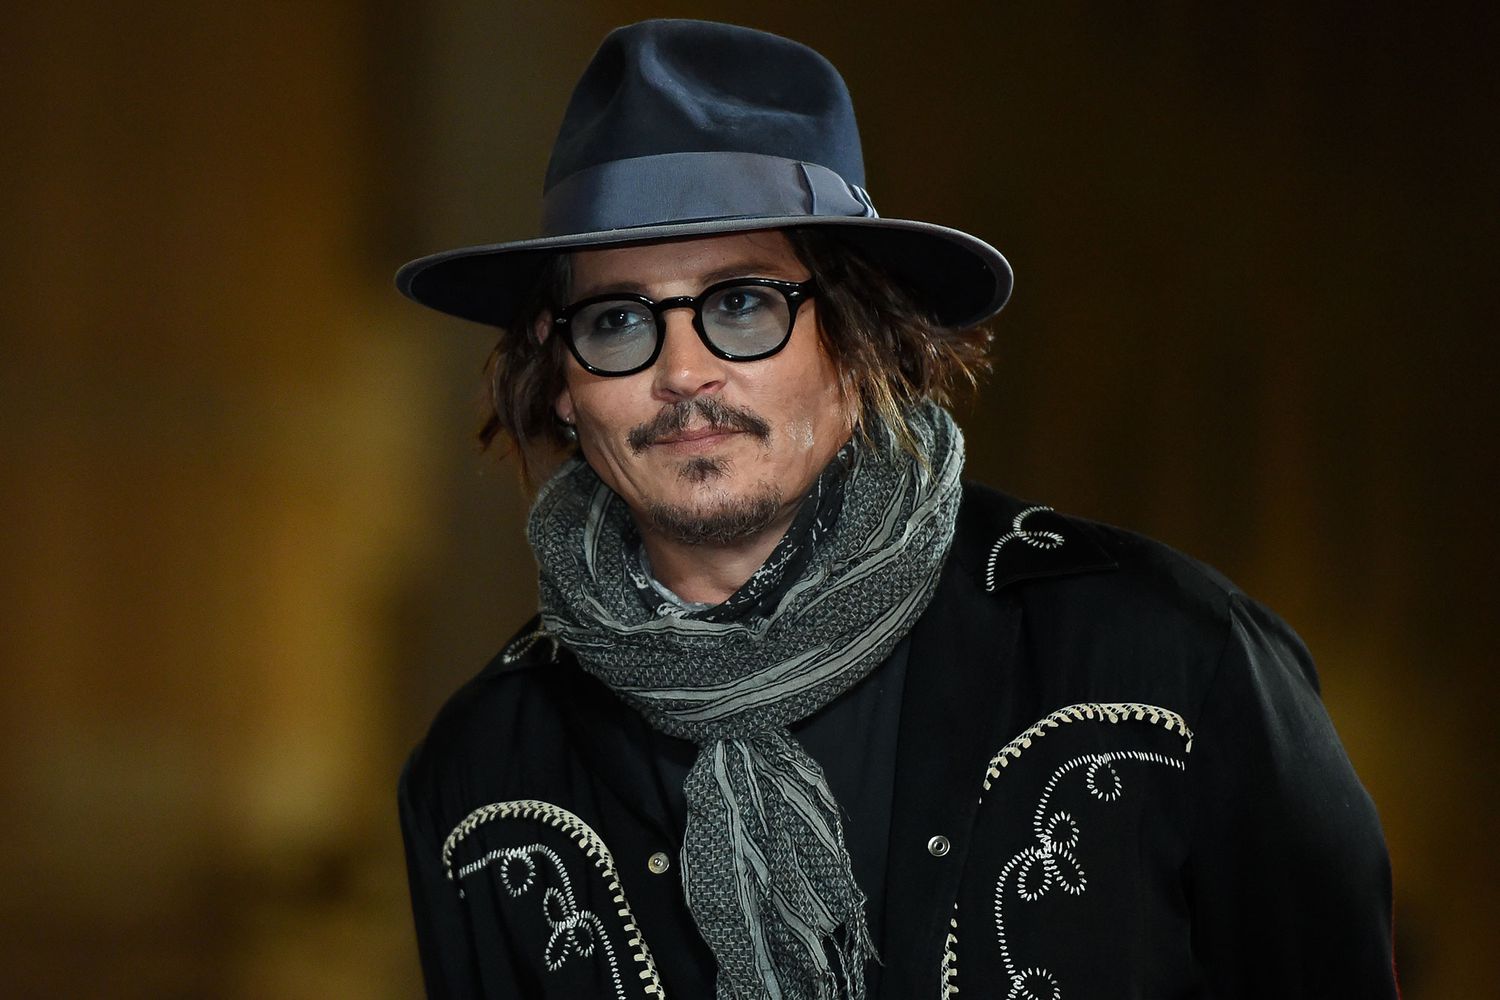 Johnny Depp to direct his first movie in 25 years, with Al Pacino co-producing